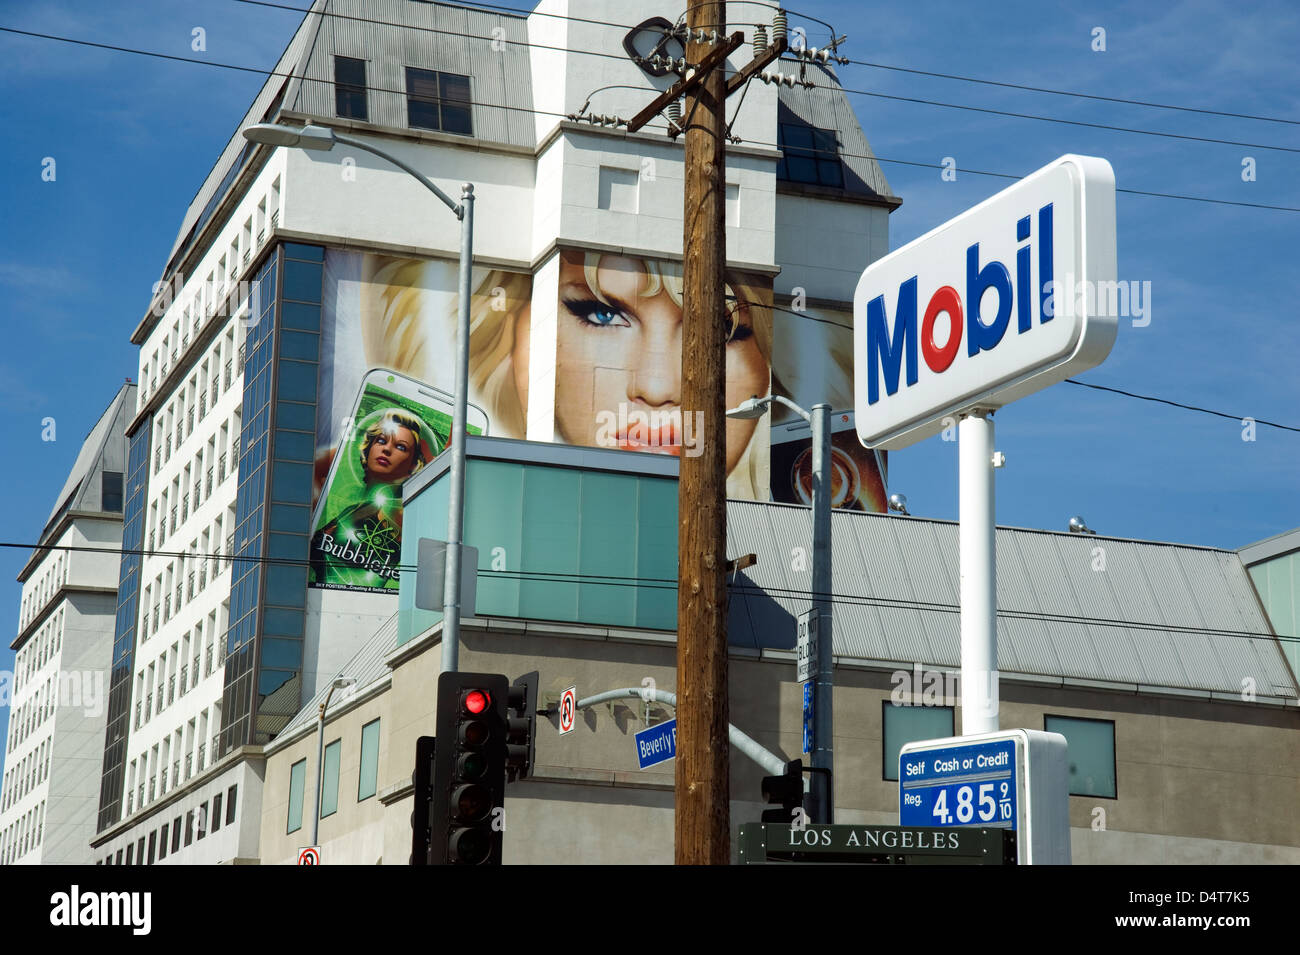 Urban landscape in Los Angeles with clutter and signs Stock Photo